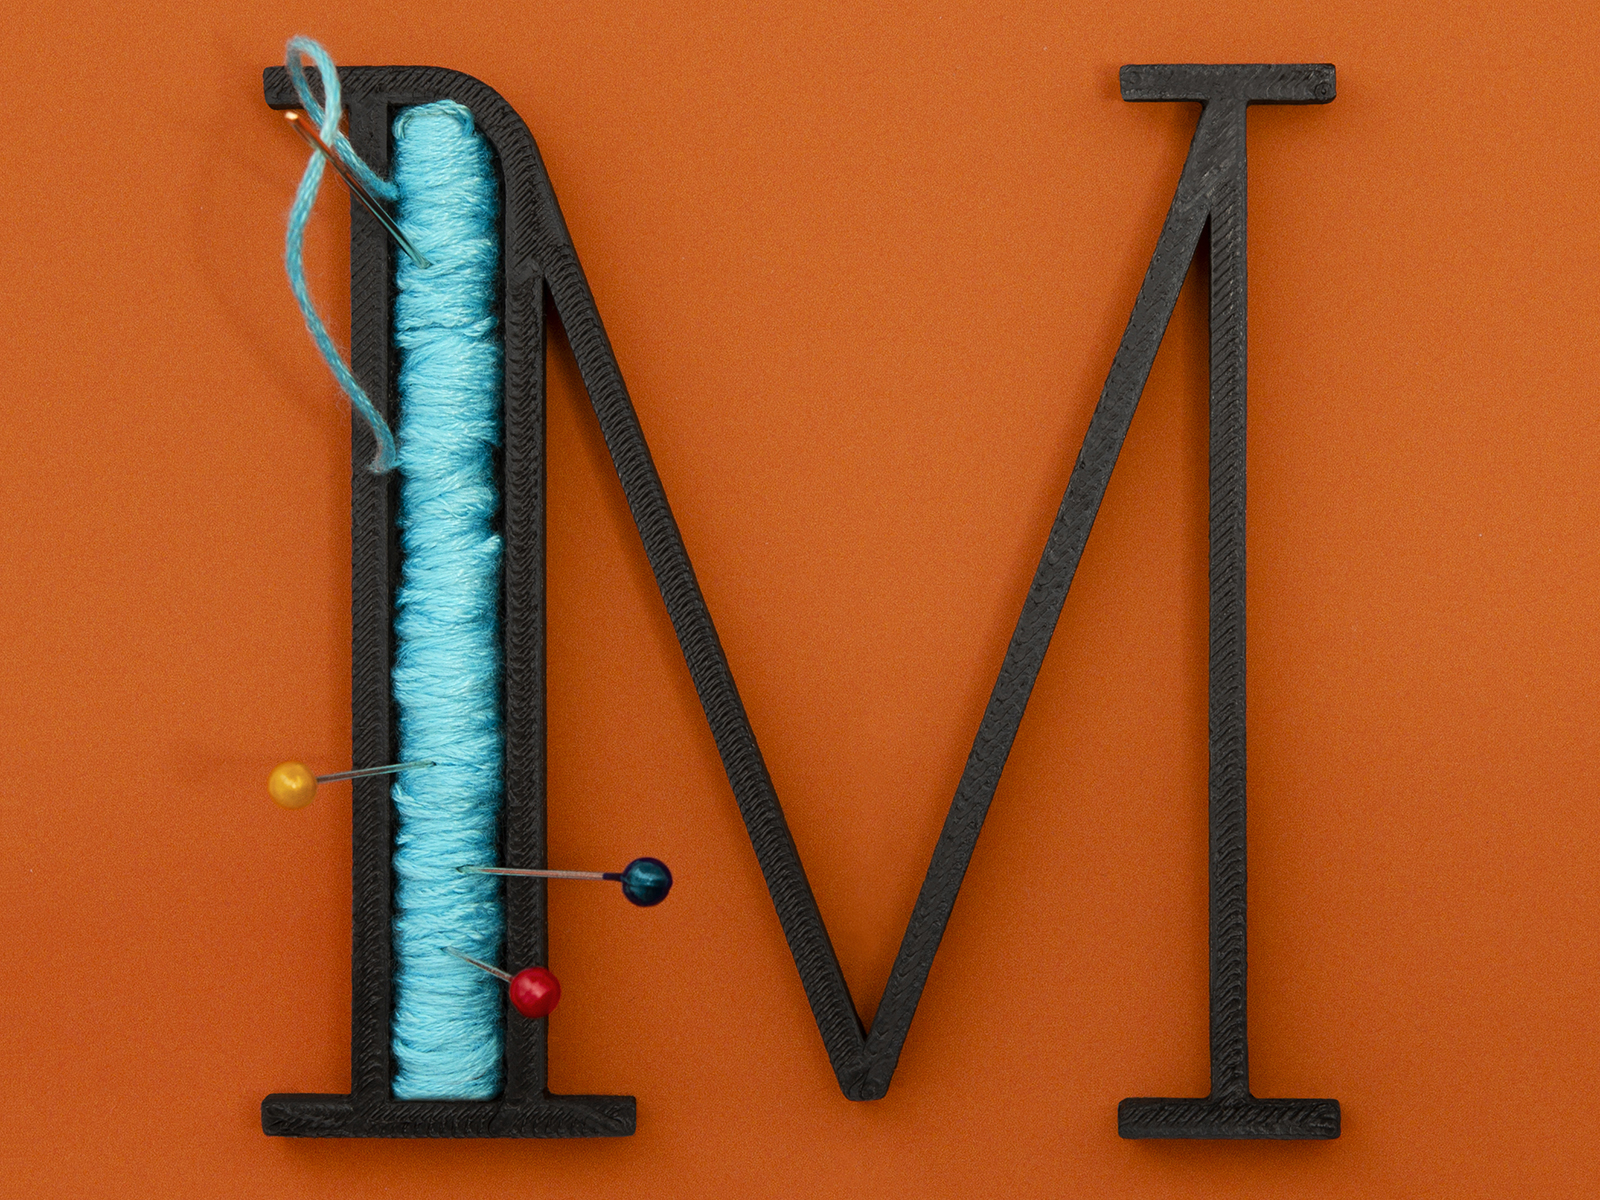 M for Matassa (Hank) 36days 36daysoftype 3d 3dprint 3dprinter a letter a day blender dribbble hank letter lettering m photography project real typo typography vector wire work